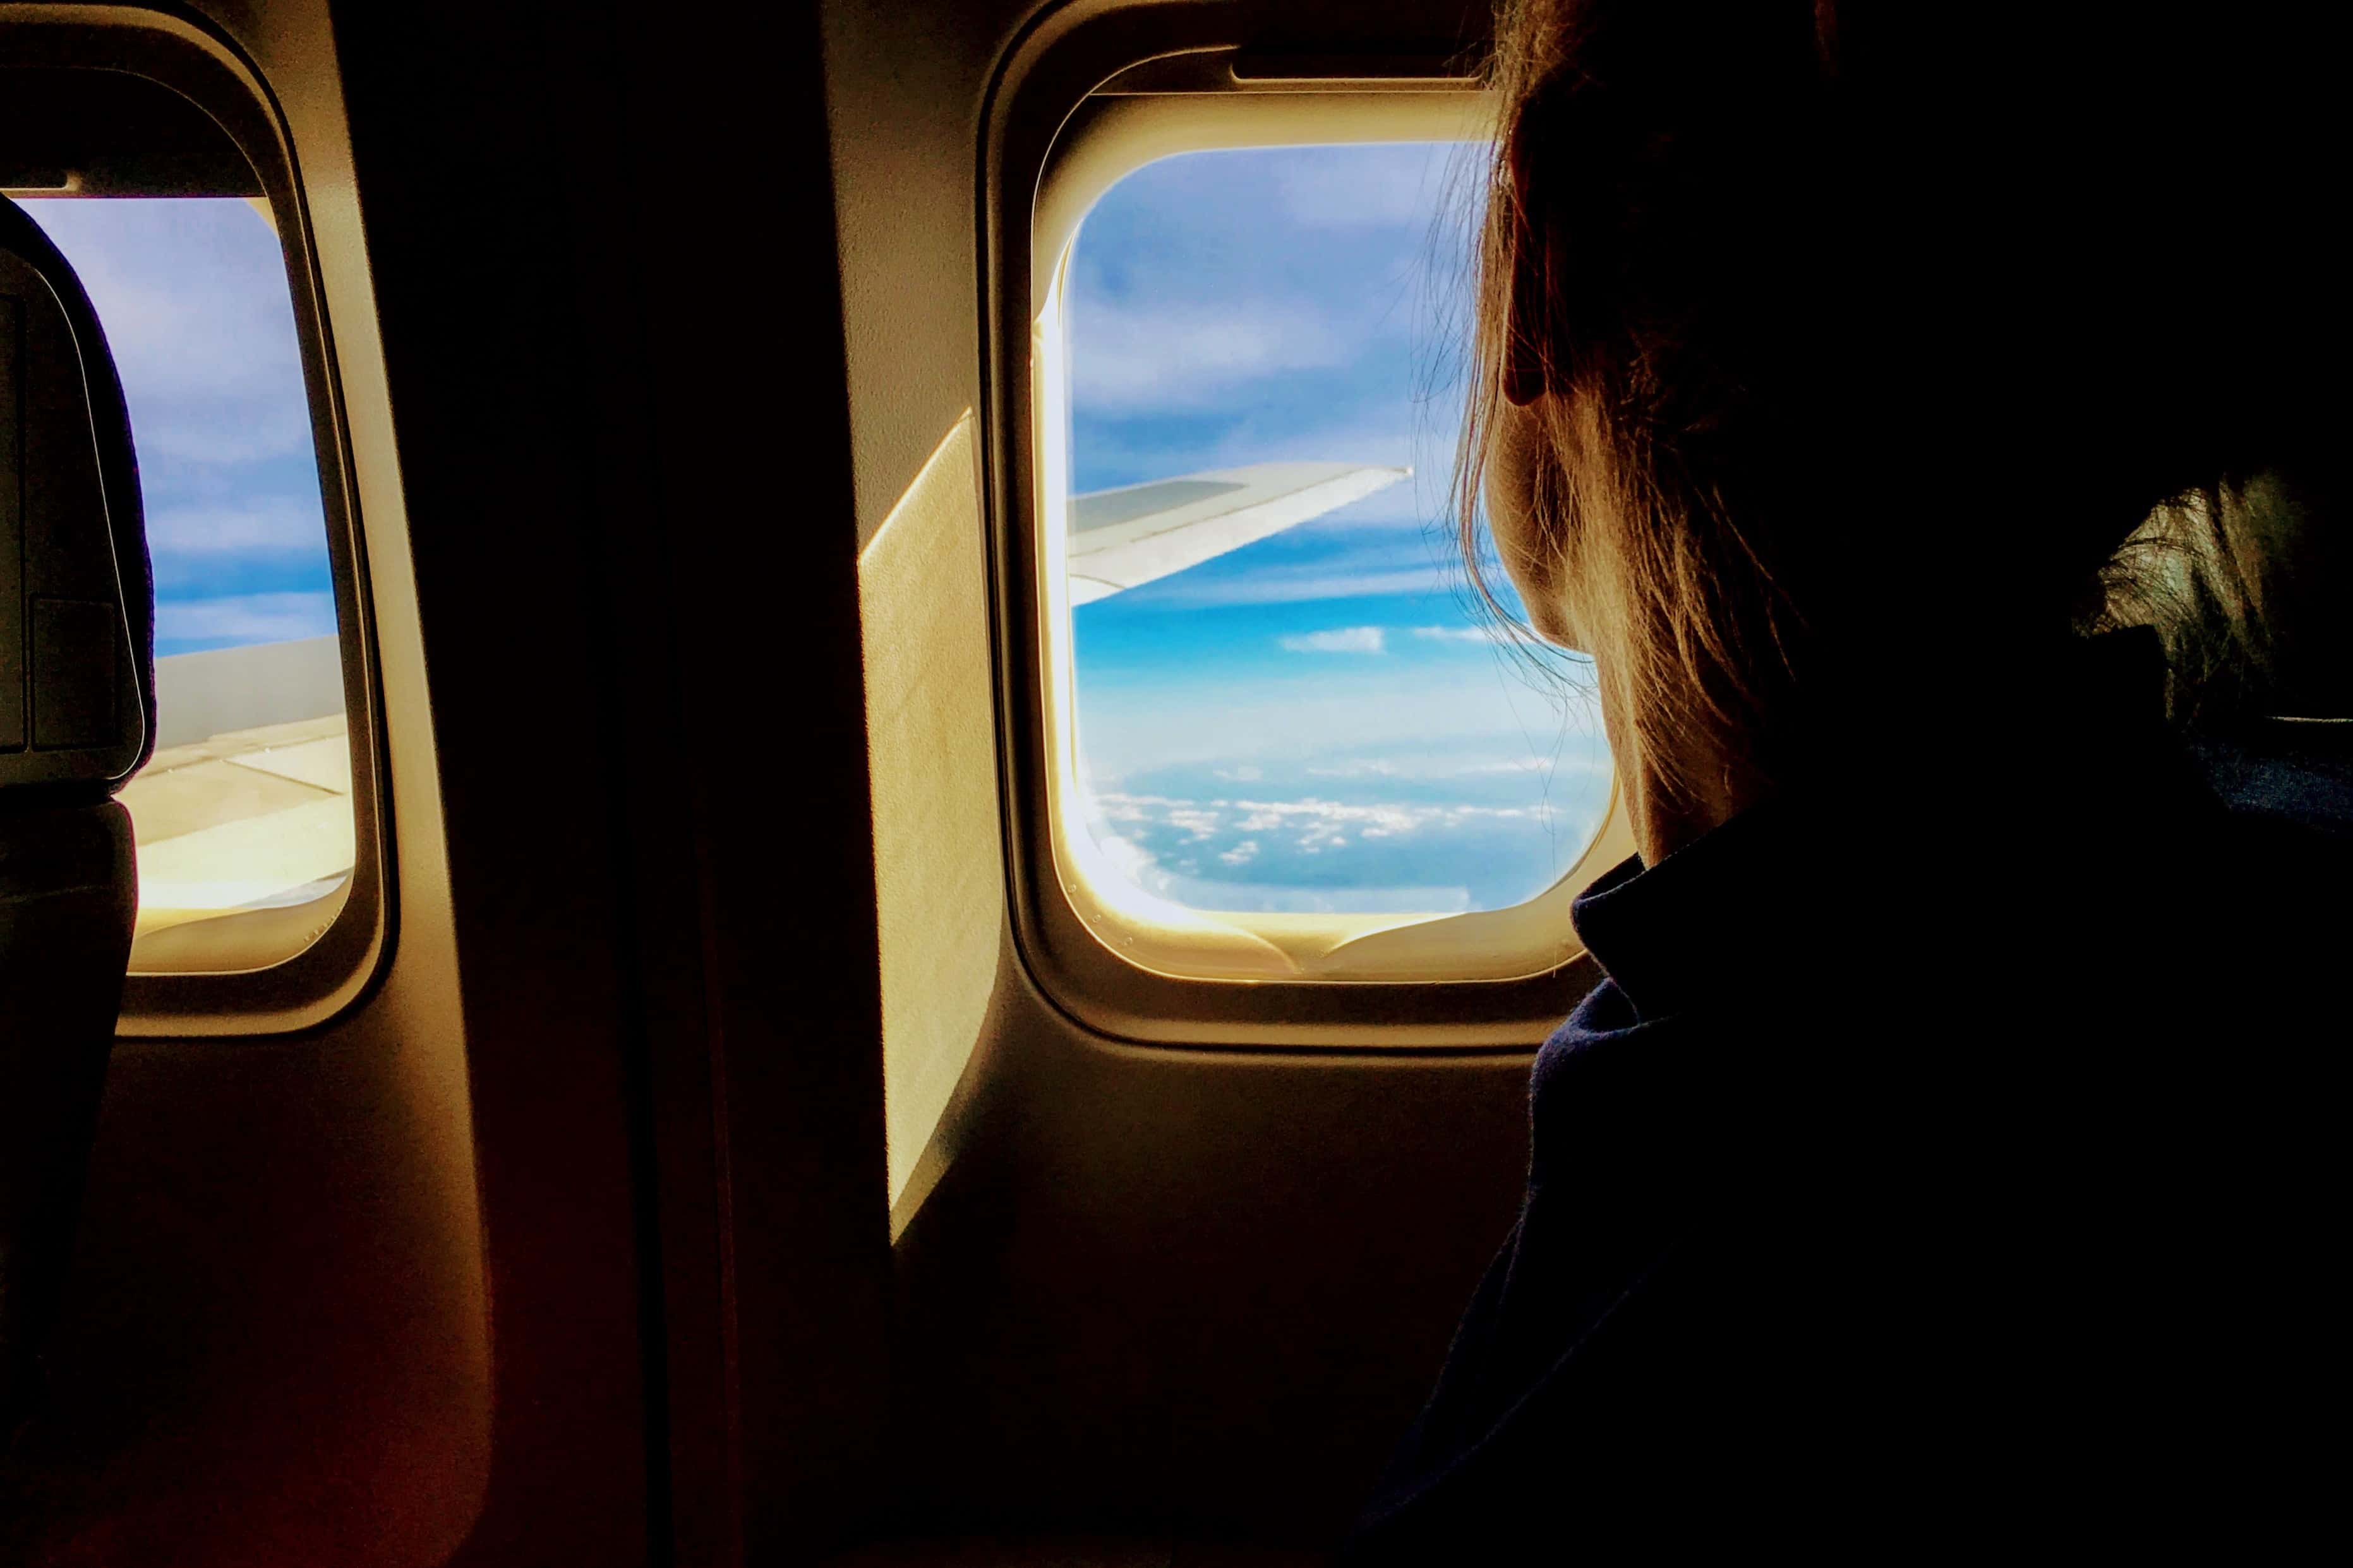 How I Overcame My Fear of Flying